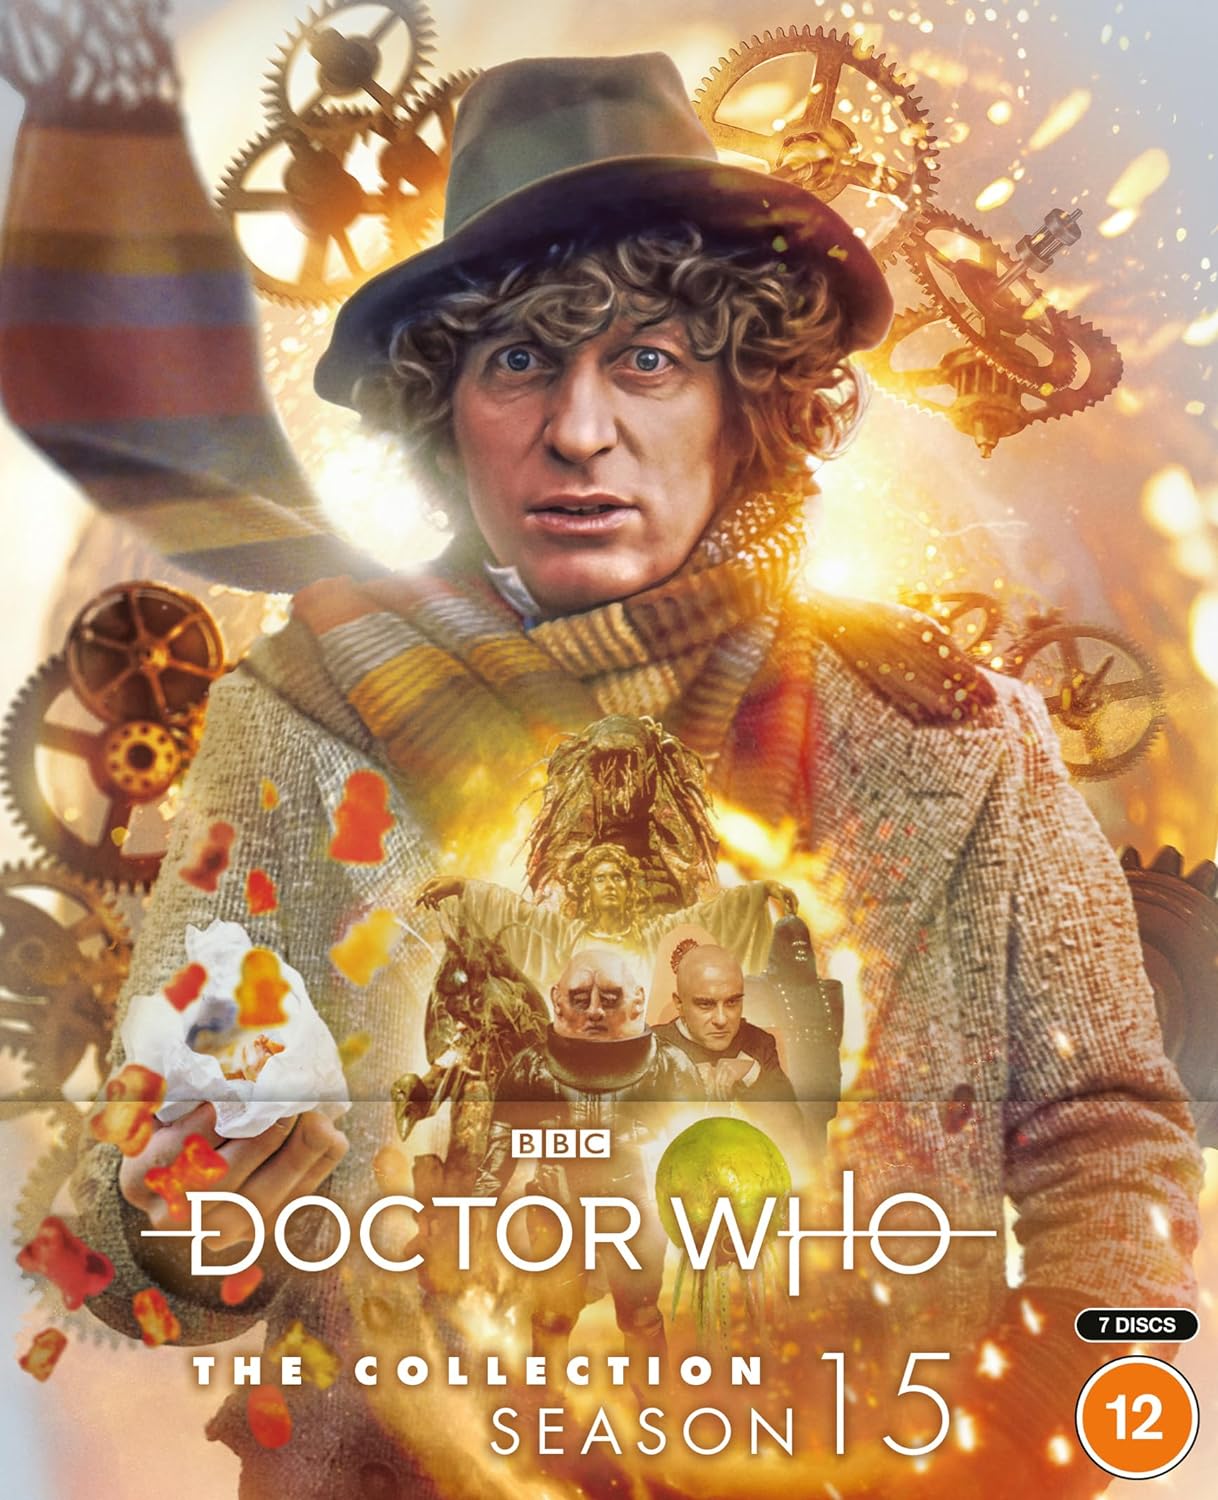 Doctor_Who_The_Collection_Season_15_DVD_cover